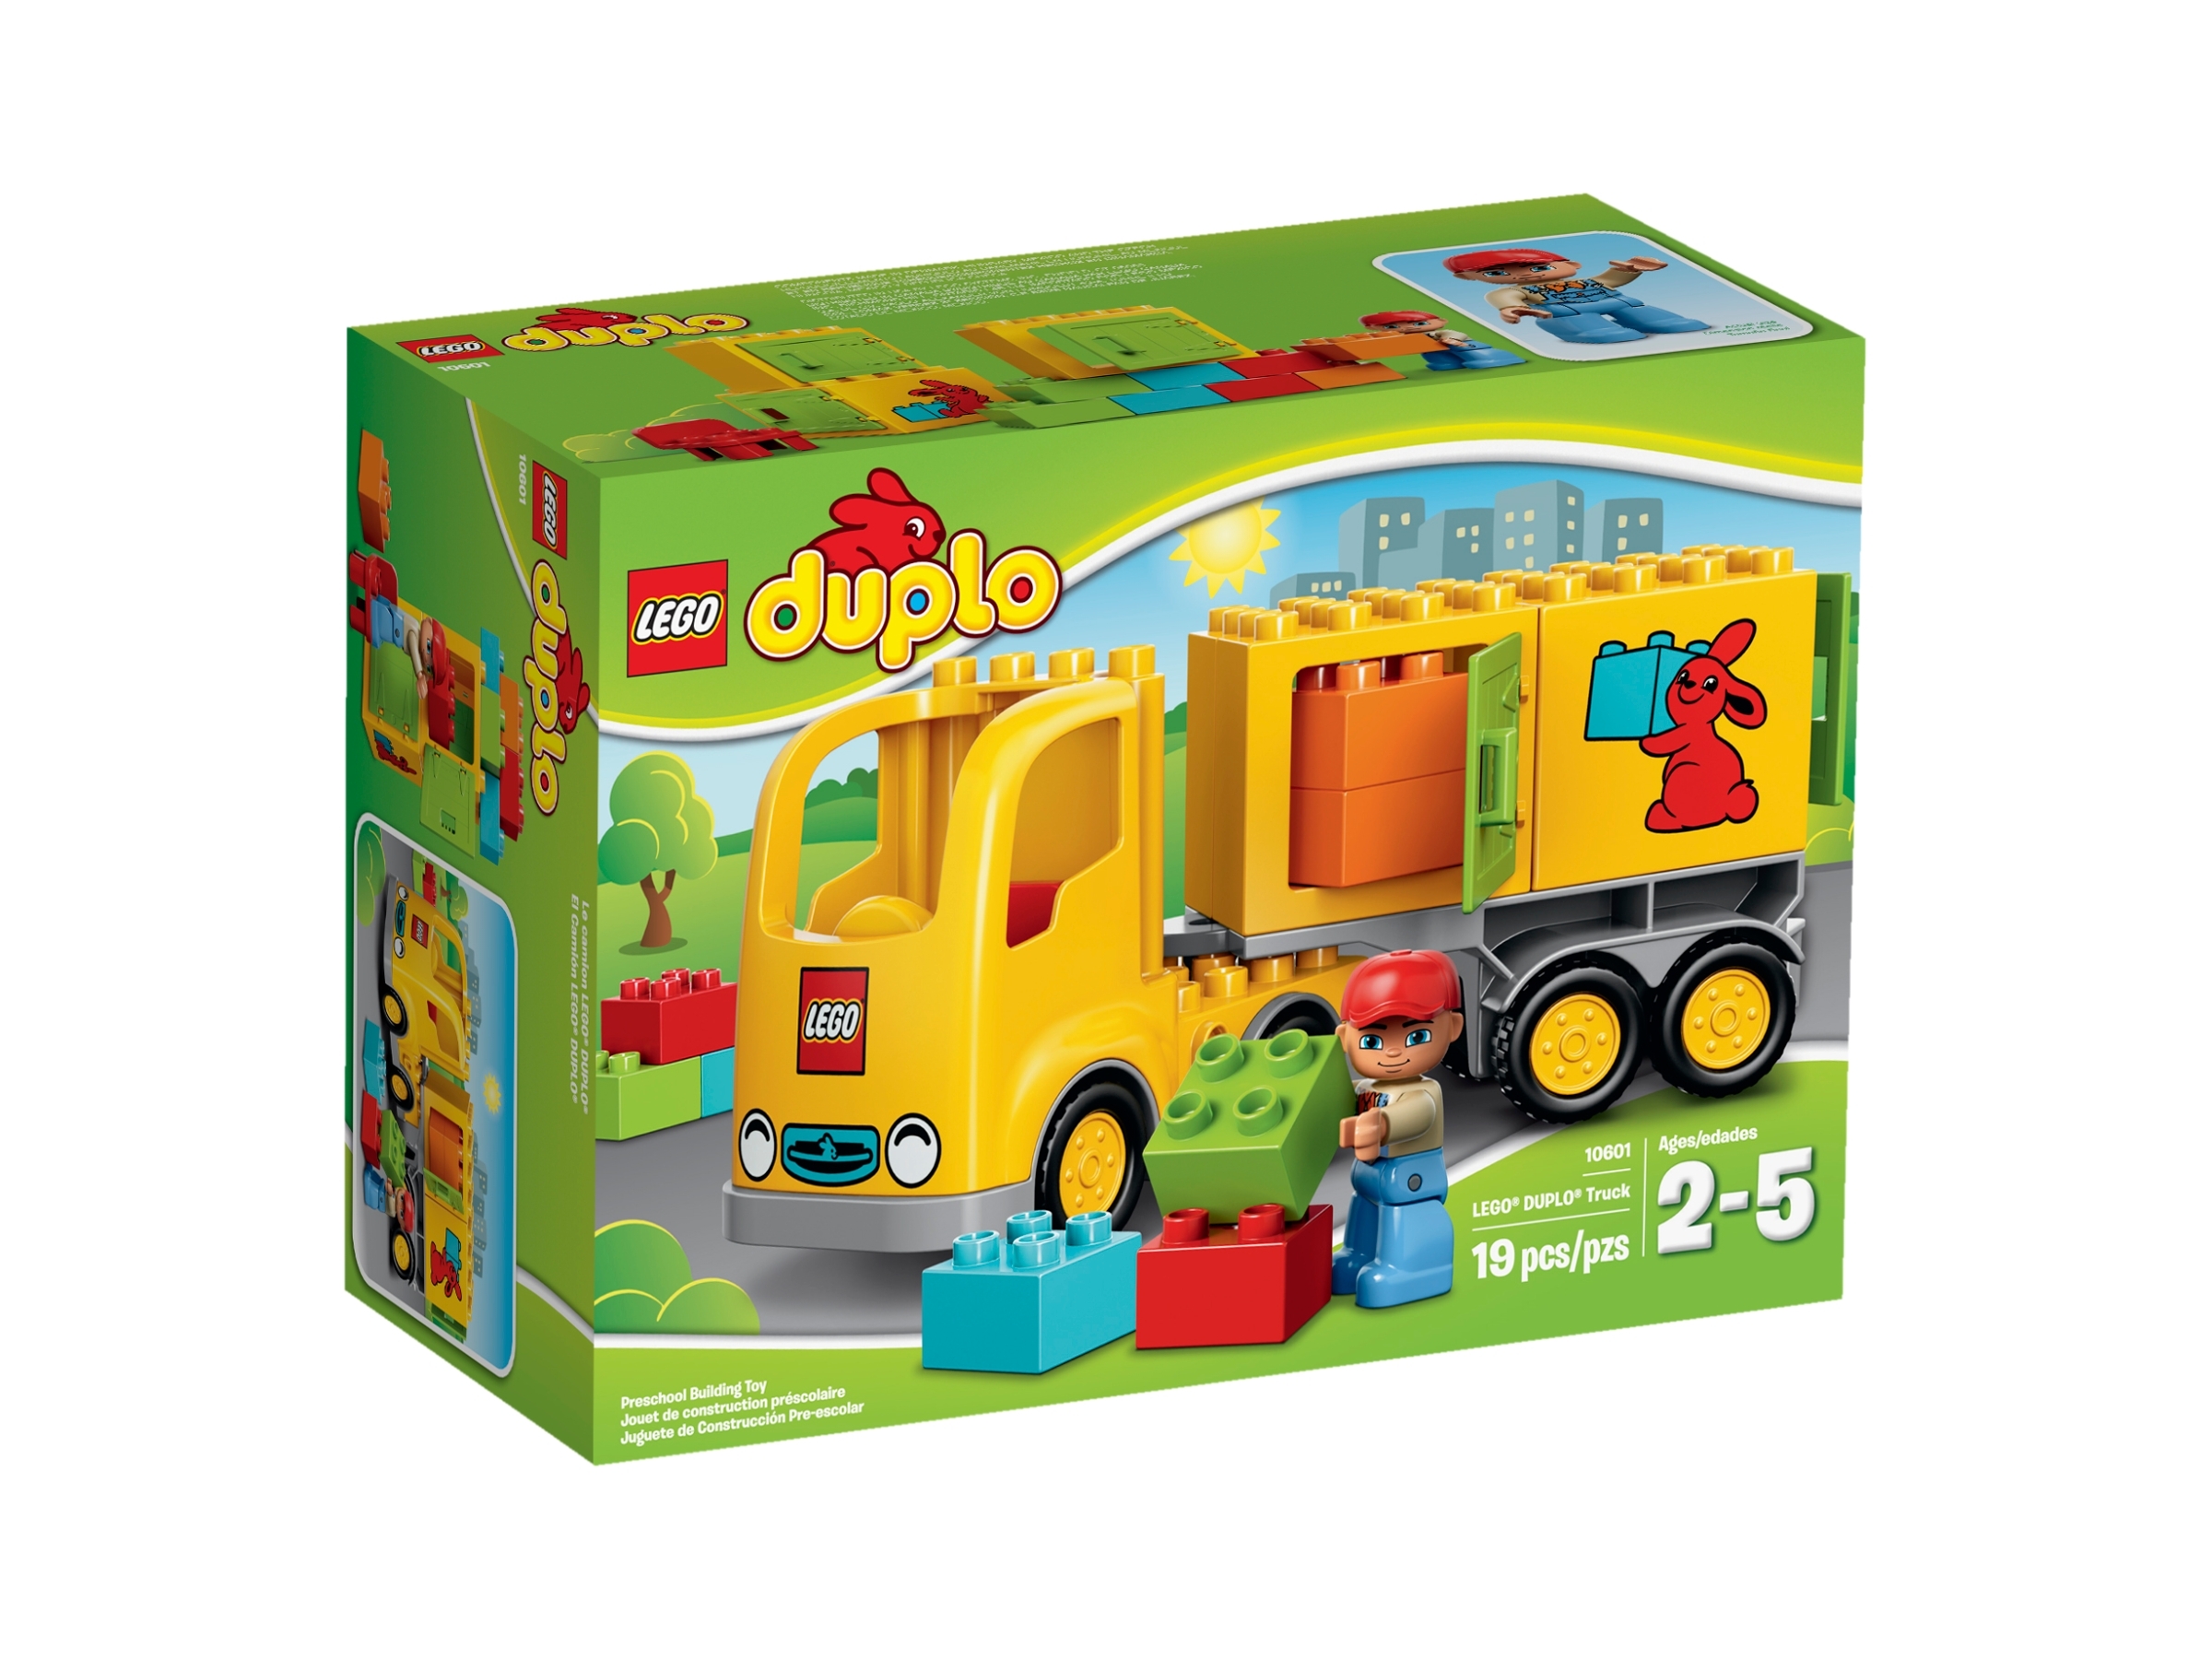 LEGO DUPLO camion truck camion #d4 